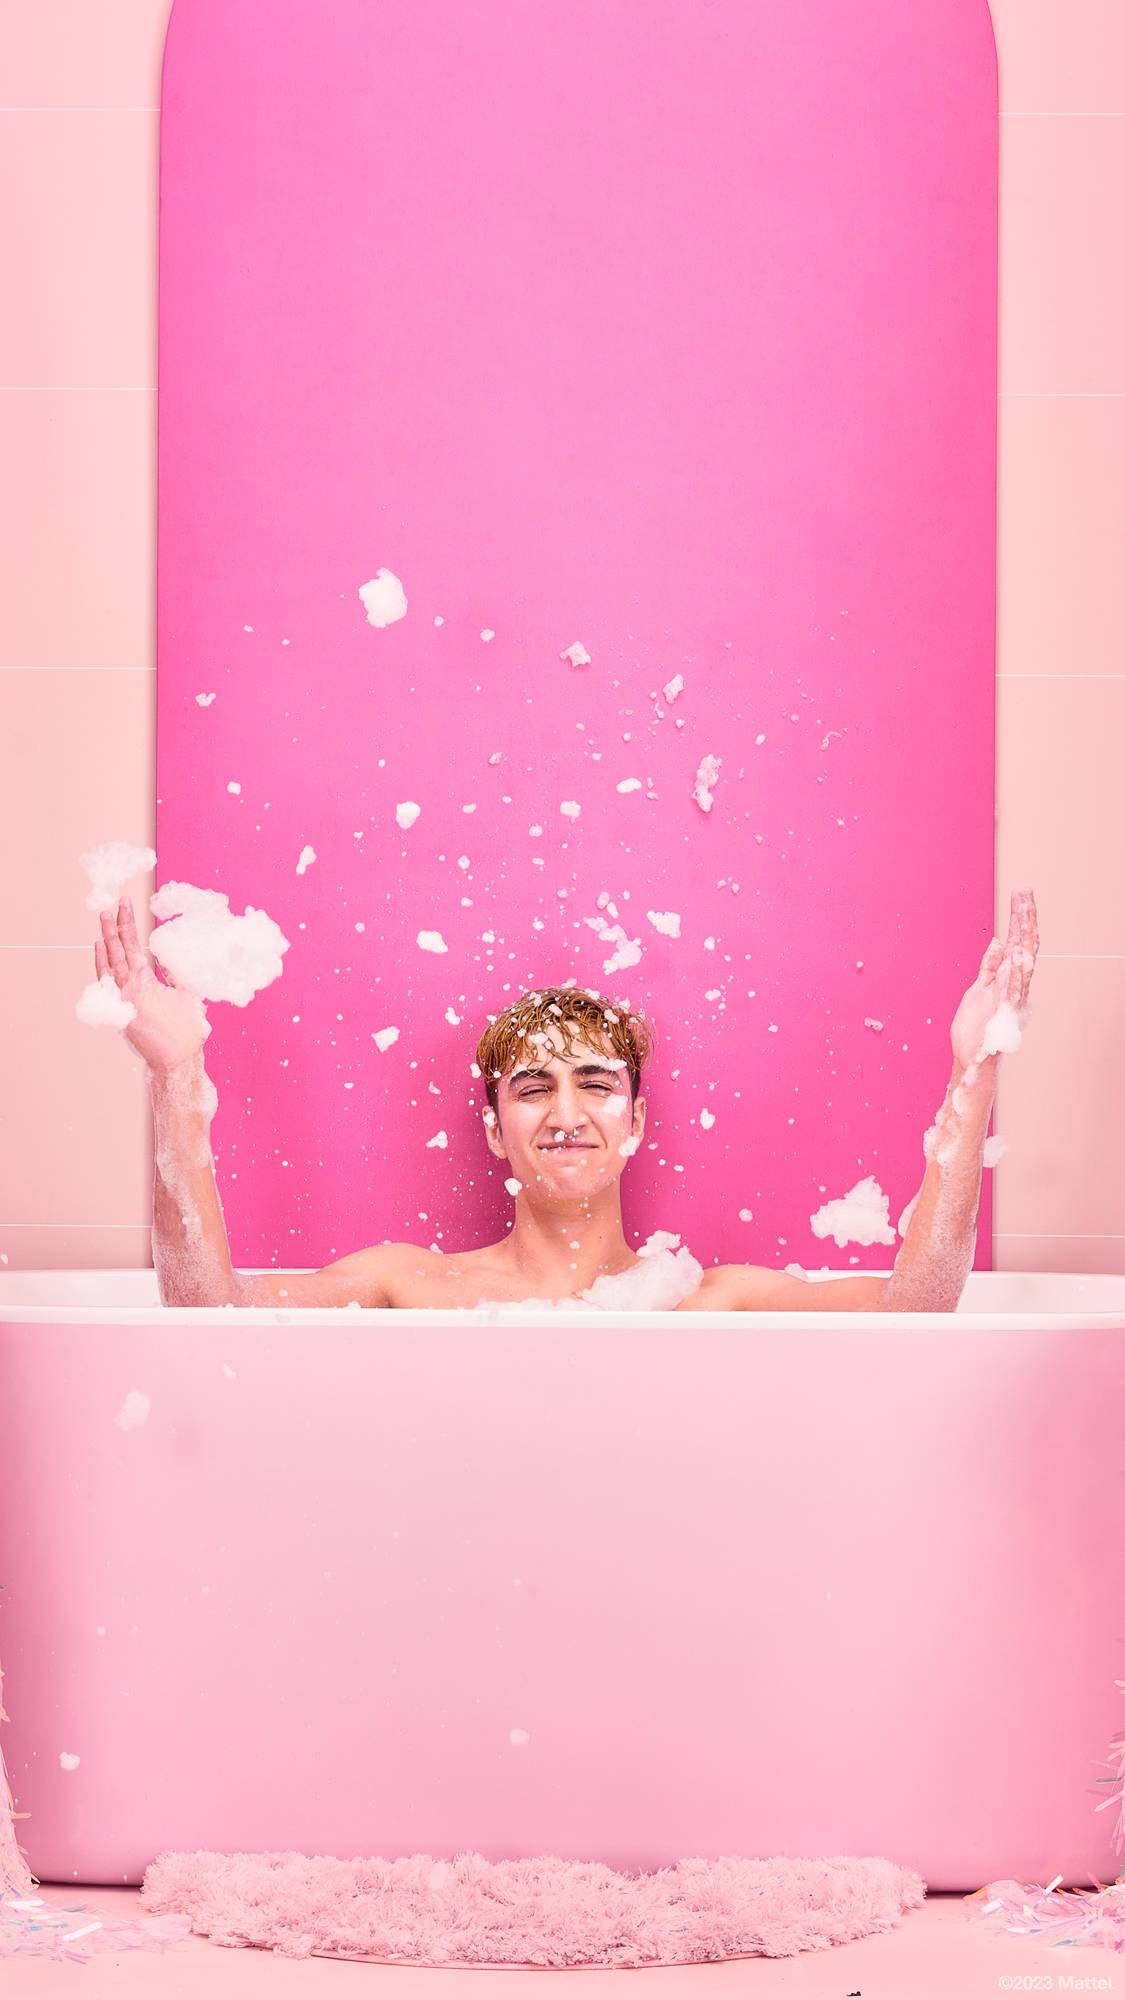 Image shows the model sat in the bathtub in front of a bright pink background after having just thrown bubbles in the air.